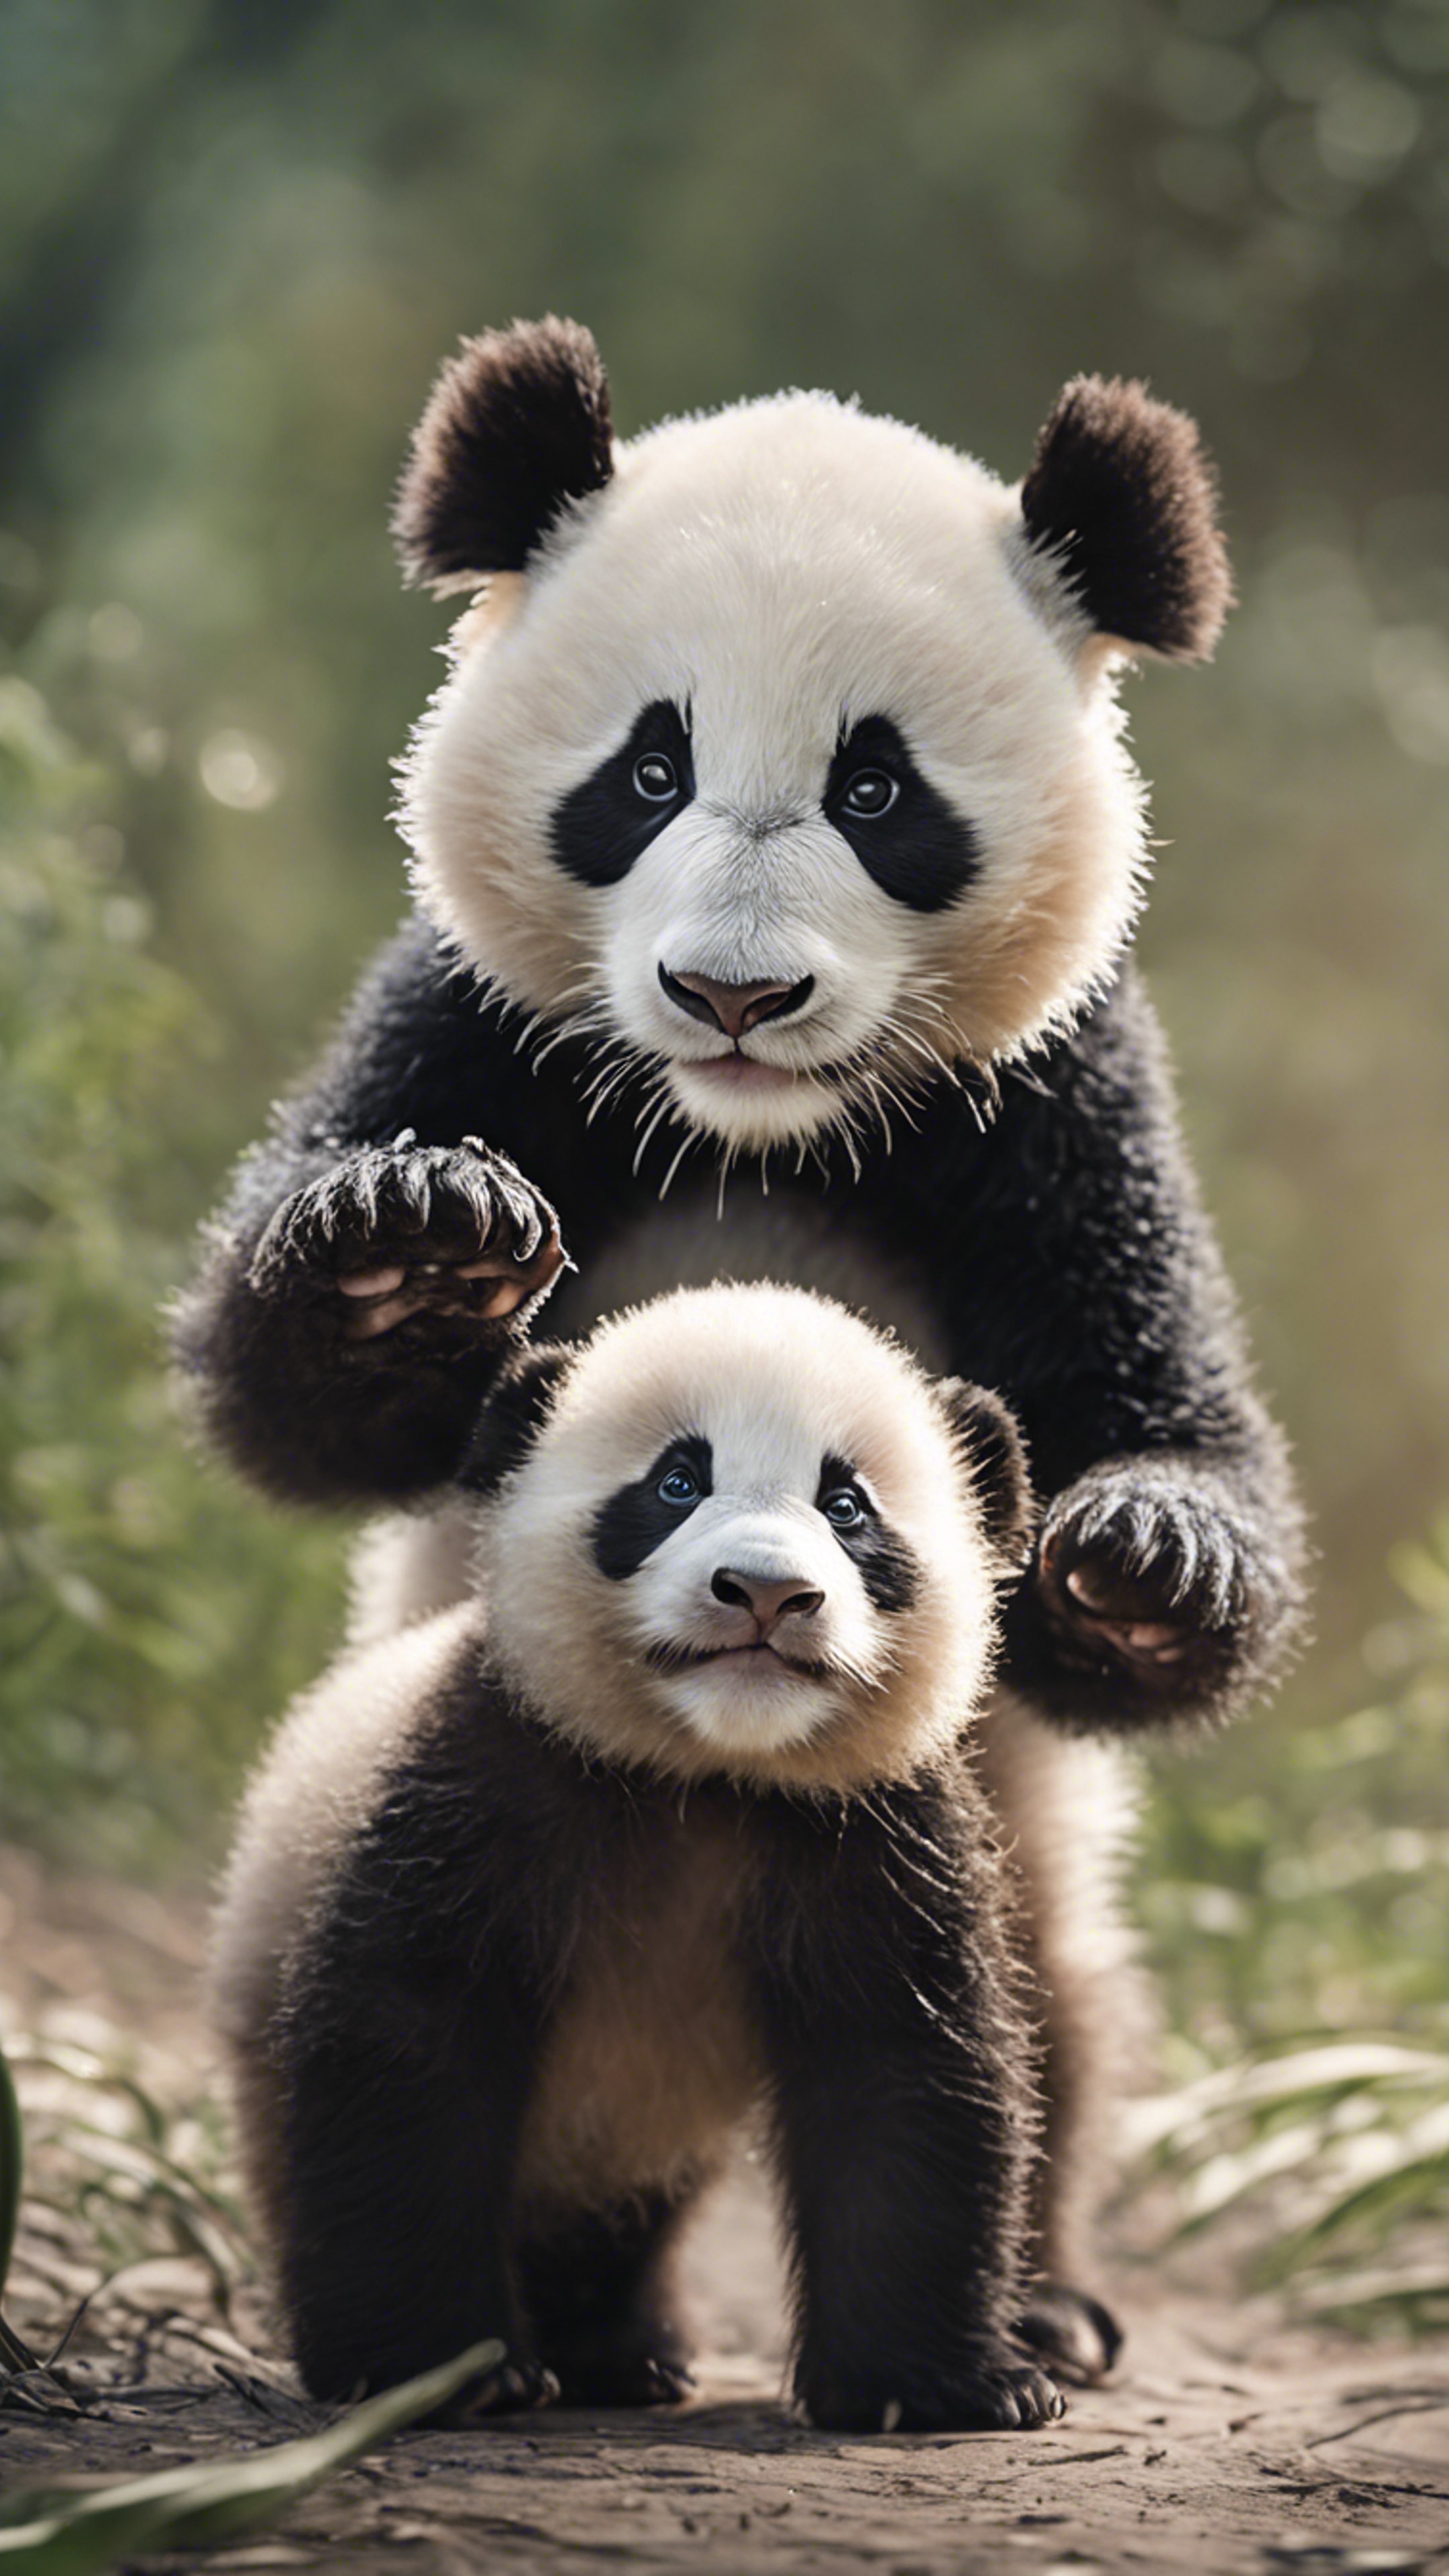 A newborn panda cub learning to walk, under the loving guidance of its mother. ផ្ទាំង​រូបភាព[d326db7fc4d14111aedf]